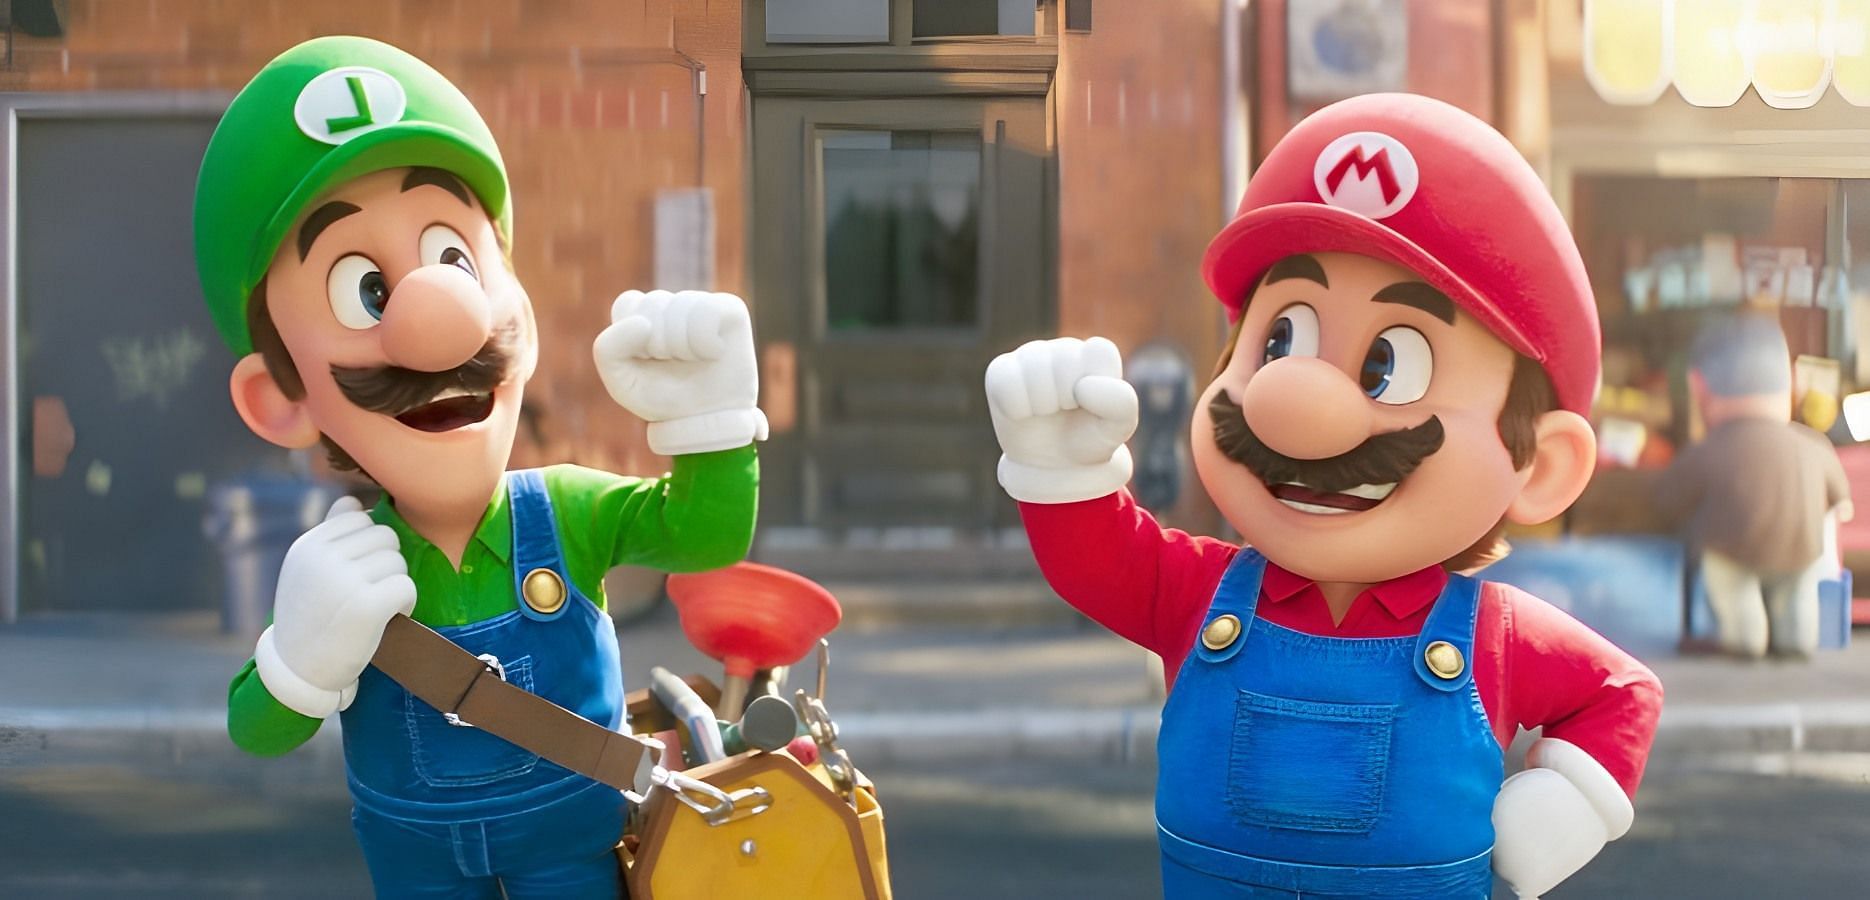 Mario and Luigi frantically run through the busy streets of Brooklyn. (Image via Universal Pictures)